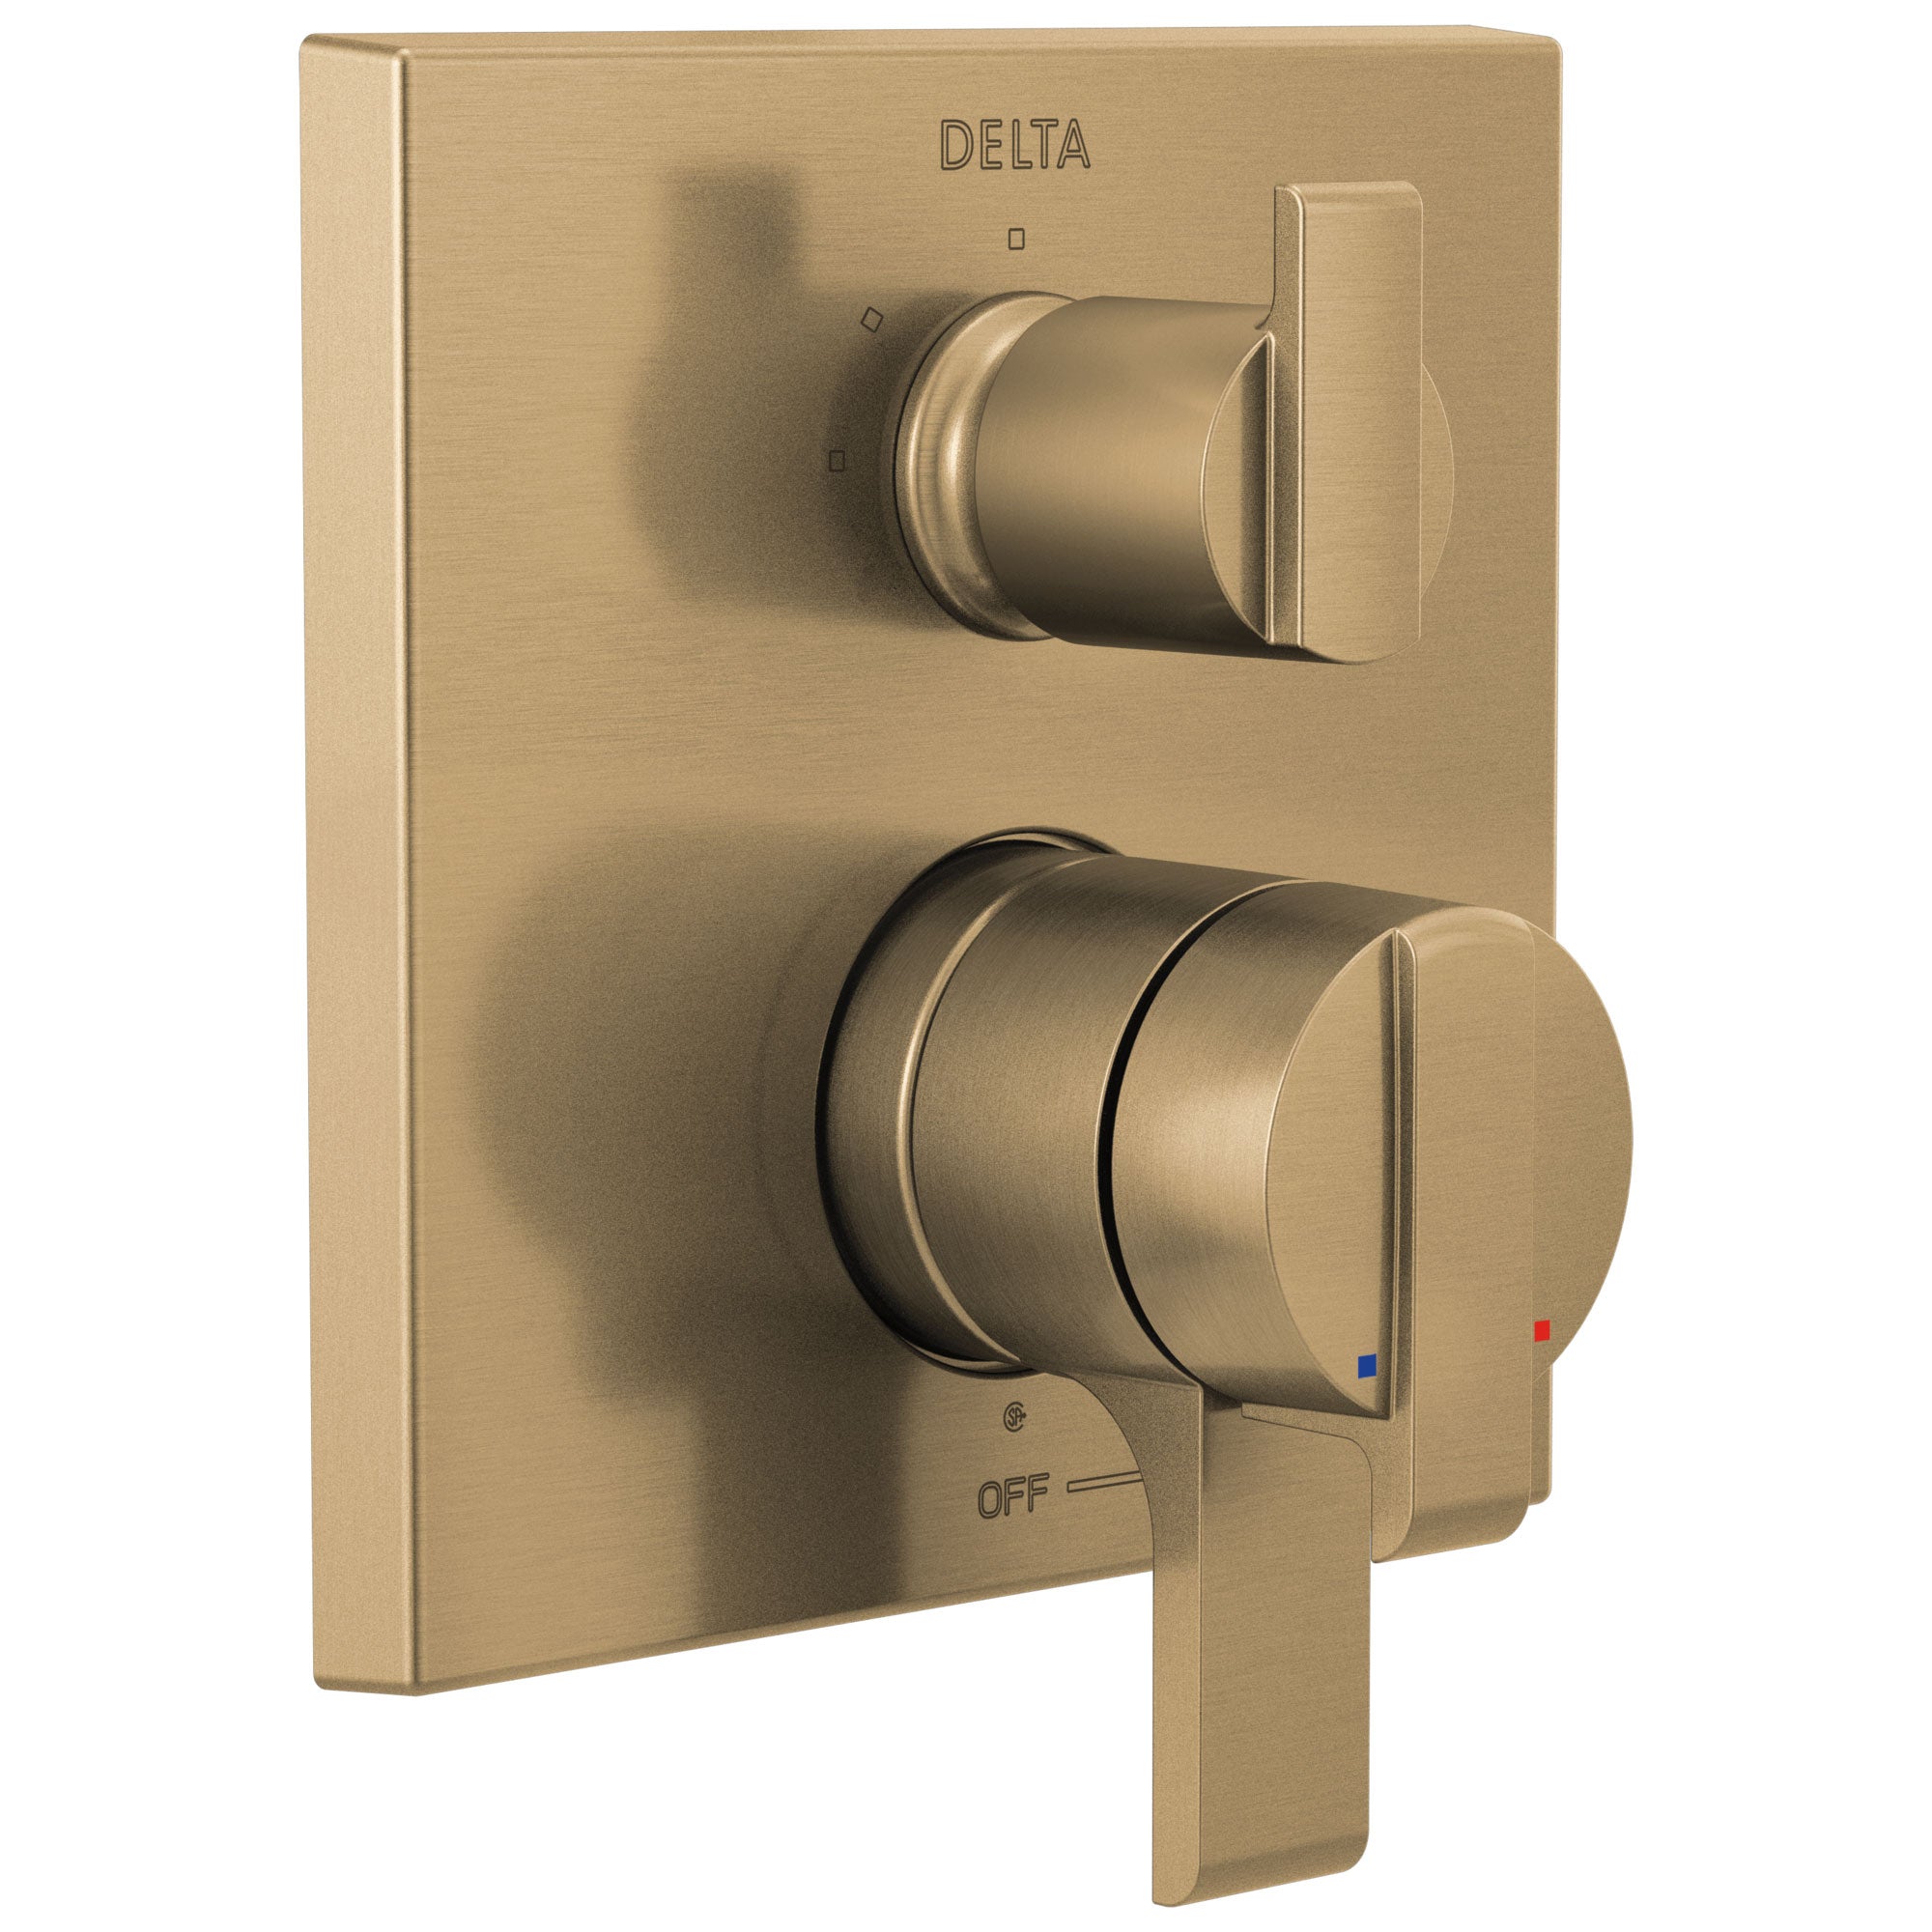 Delta Ara Champagne Bronze Finish Angular Modern Monitor 17 Series Shower Control Trim Kit with 3-Setting Integrated Diverter (Requires Valve) DT27867CZ